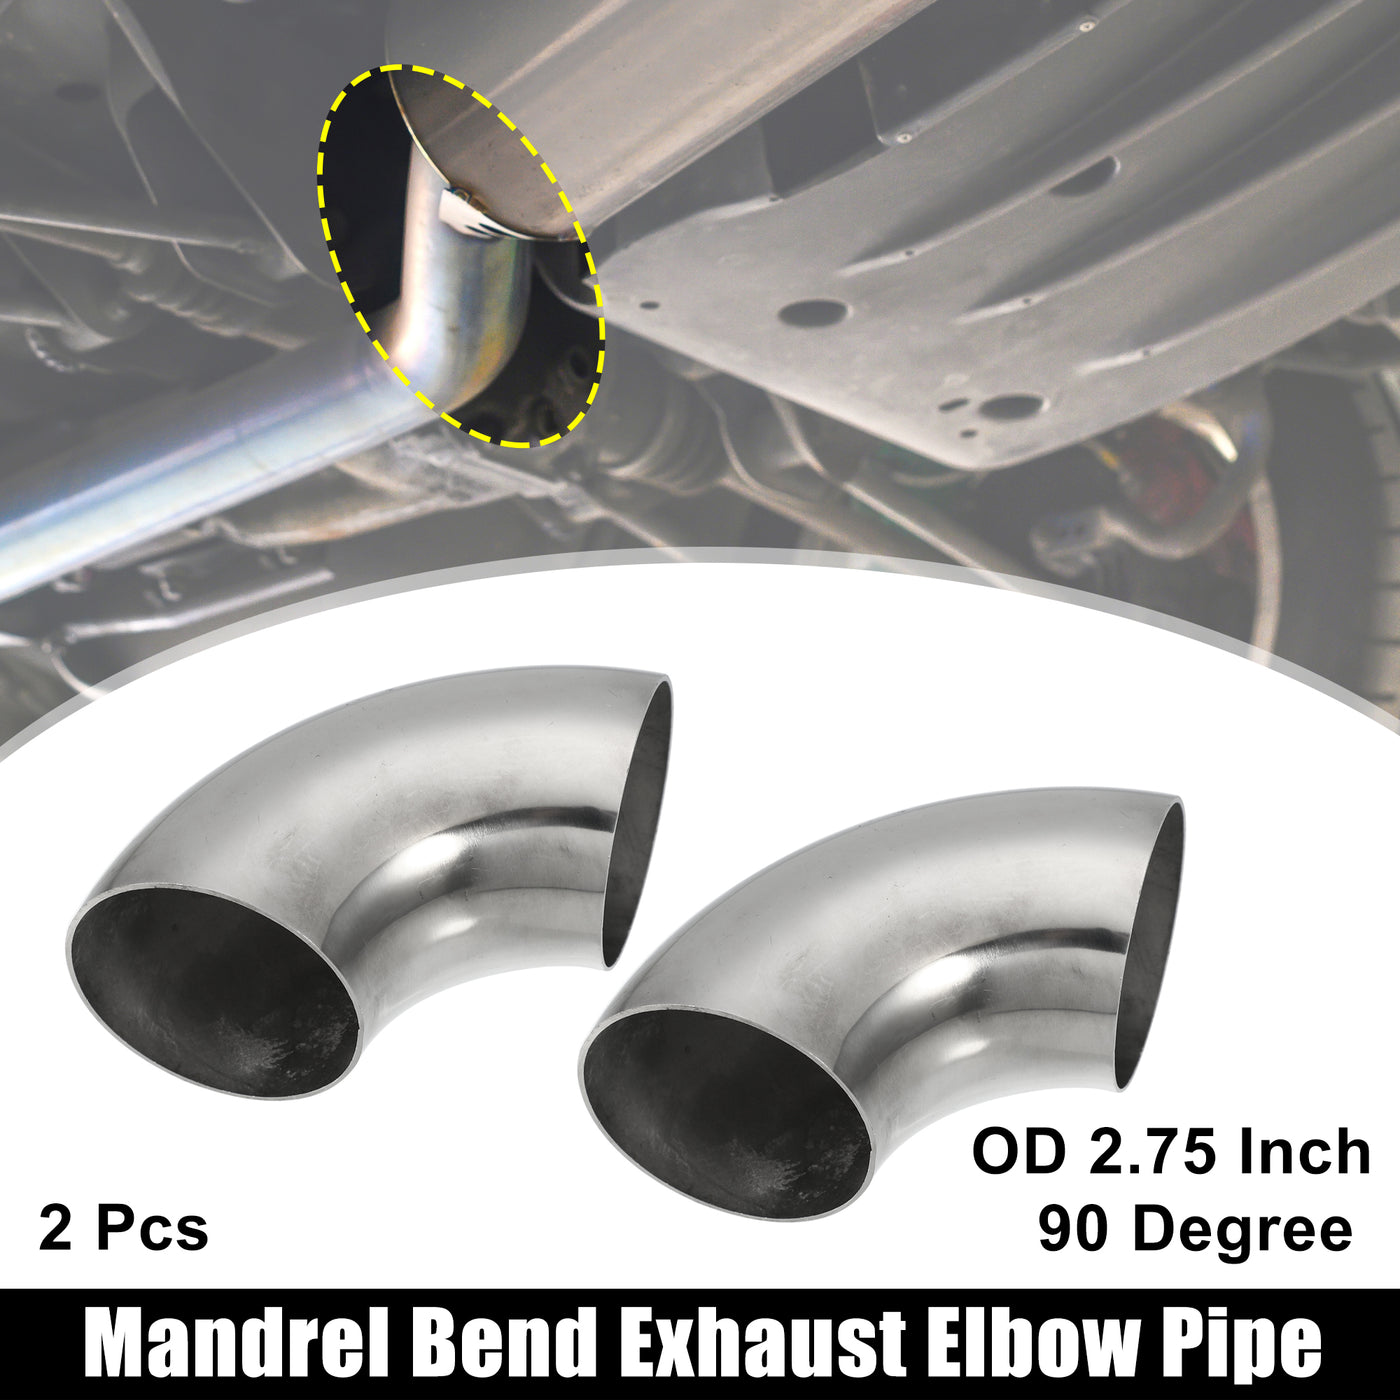 X AUTOHAUX 2pcs 90 Degree Mandrel Bend Elbow SS304 Stainless Steel Bend Tube Exhaust Elbow Pipe for Car Modified Exhaust System  Piping Silver Tone